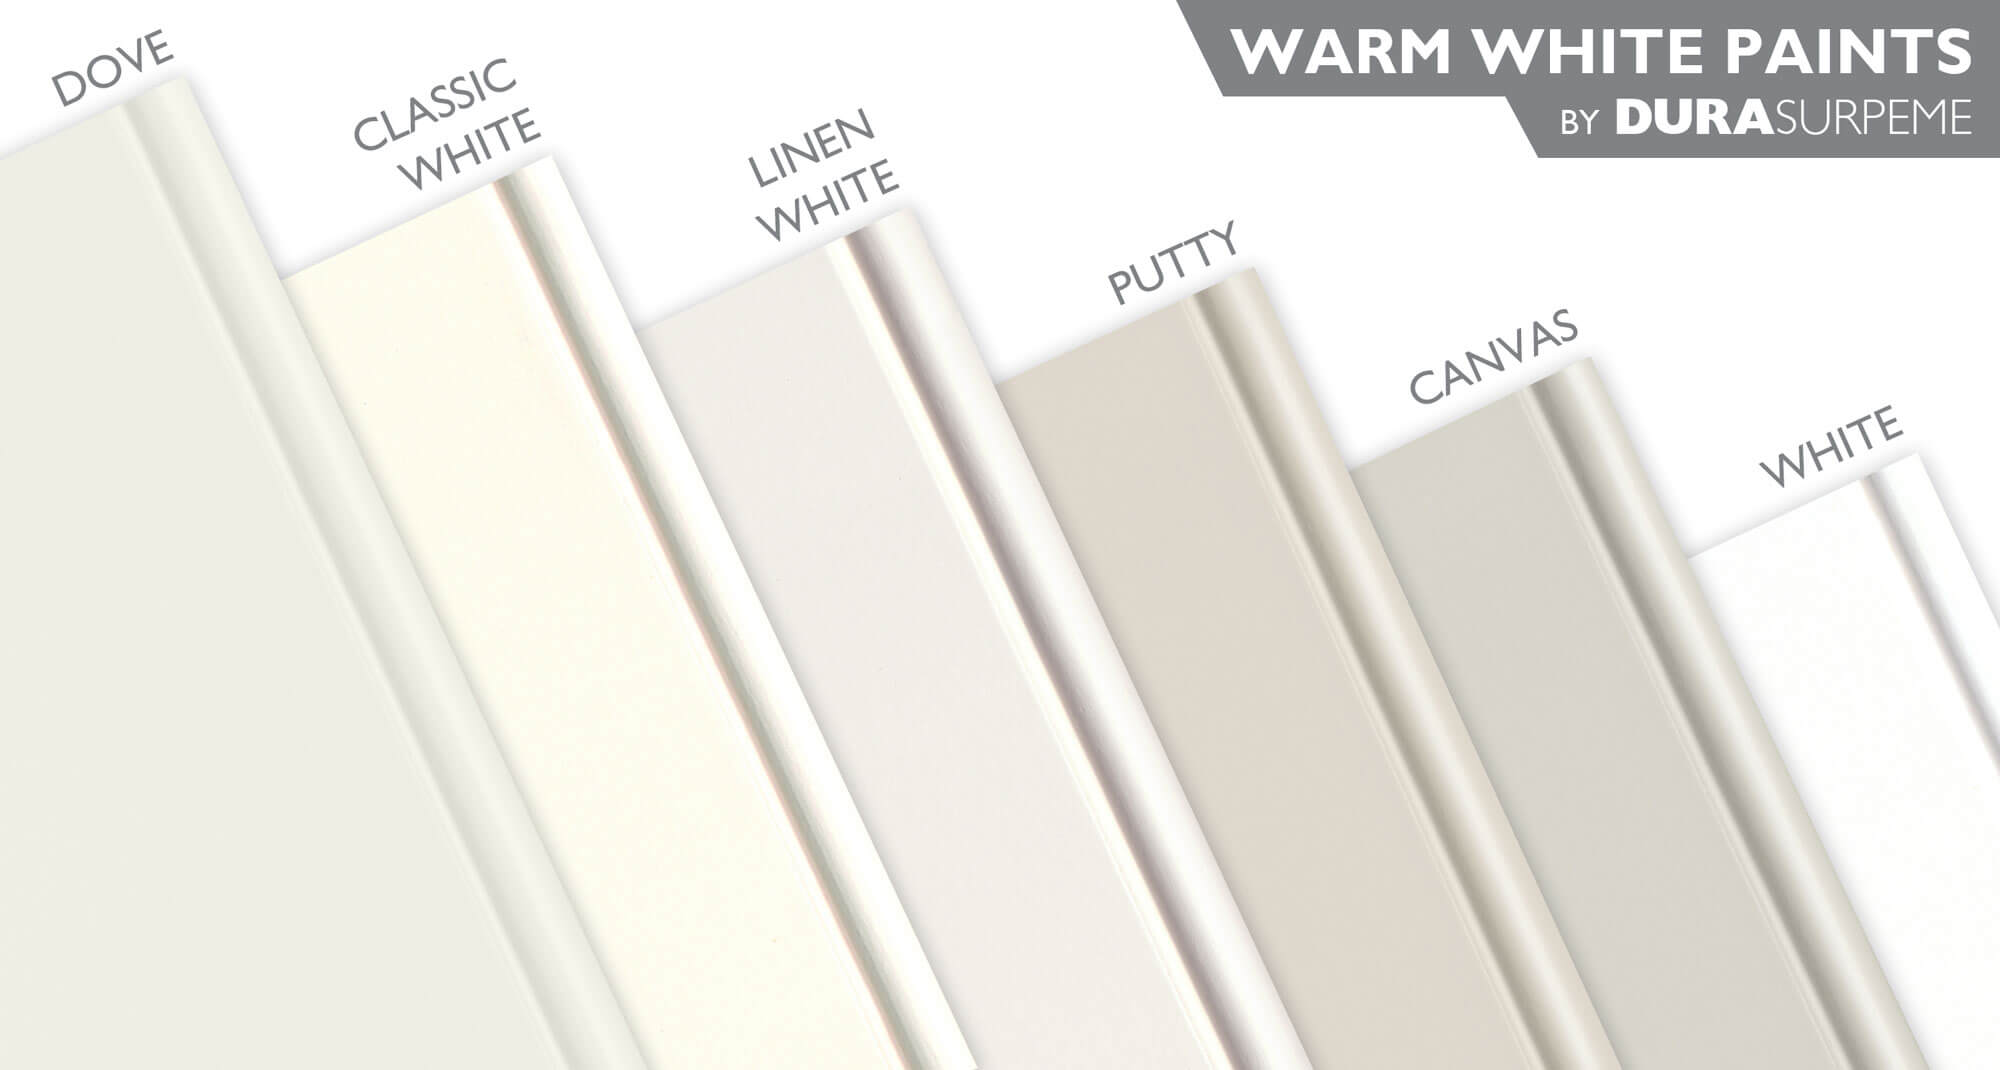 Warm White Paint Colors for kitchen & bath cabinets from Dura Supreme Cabinetry